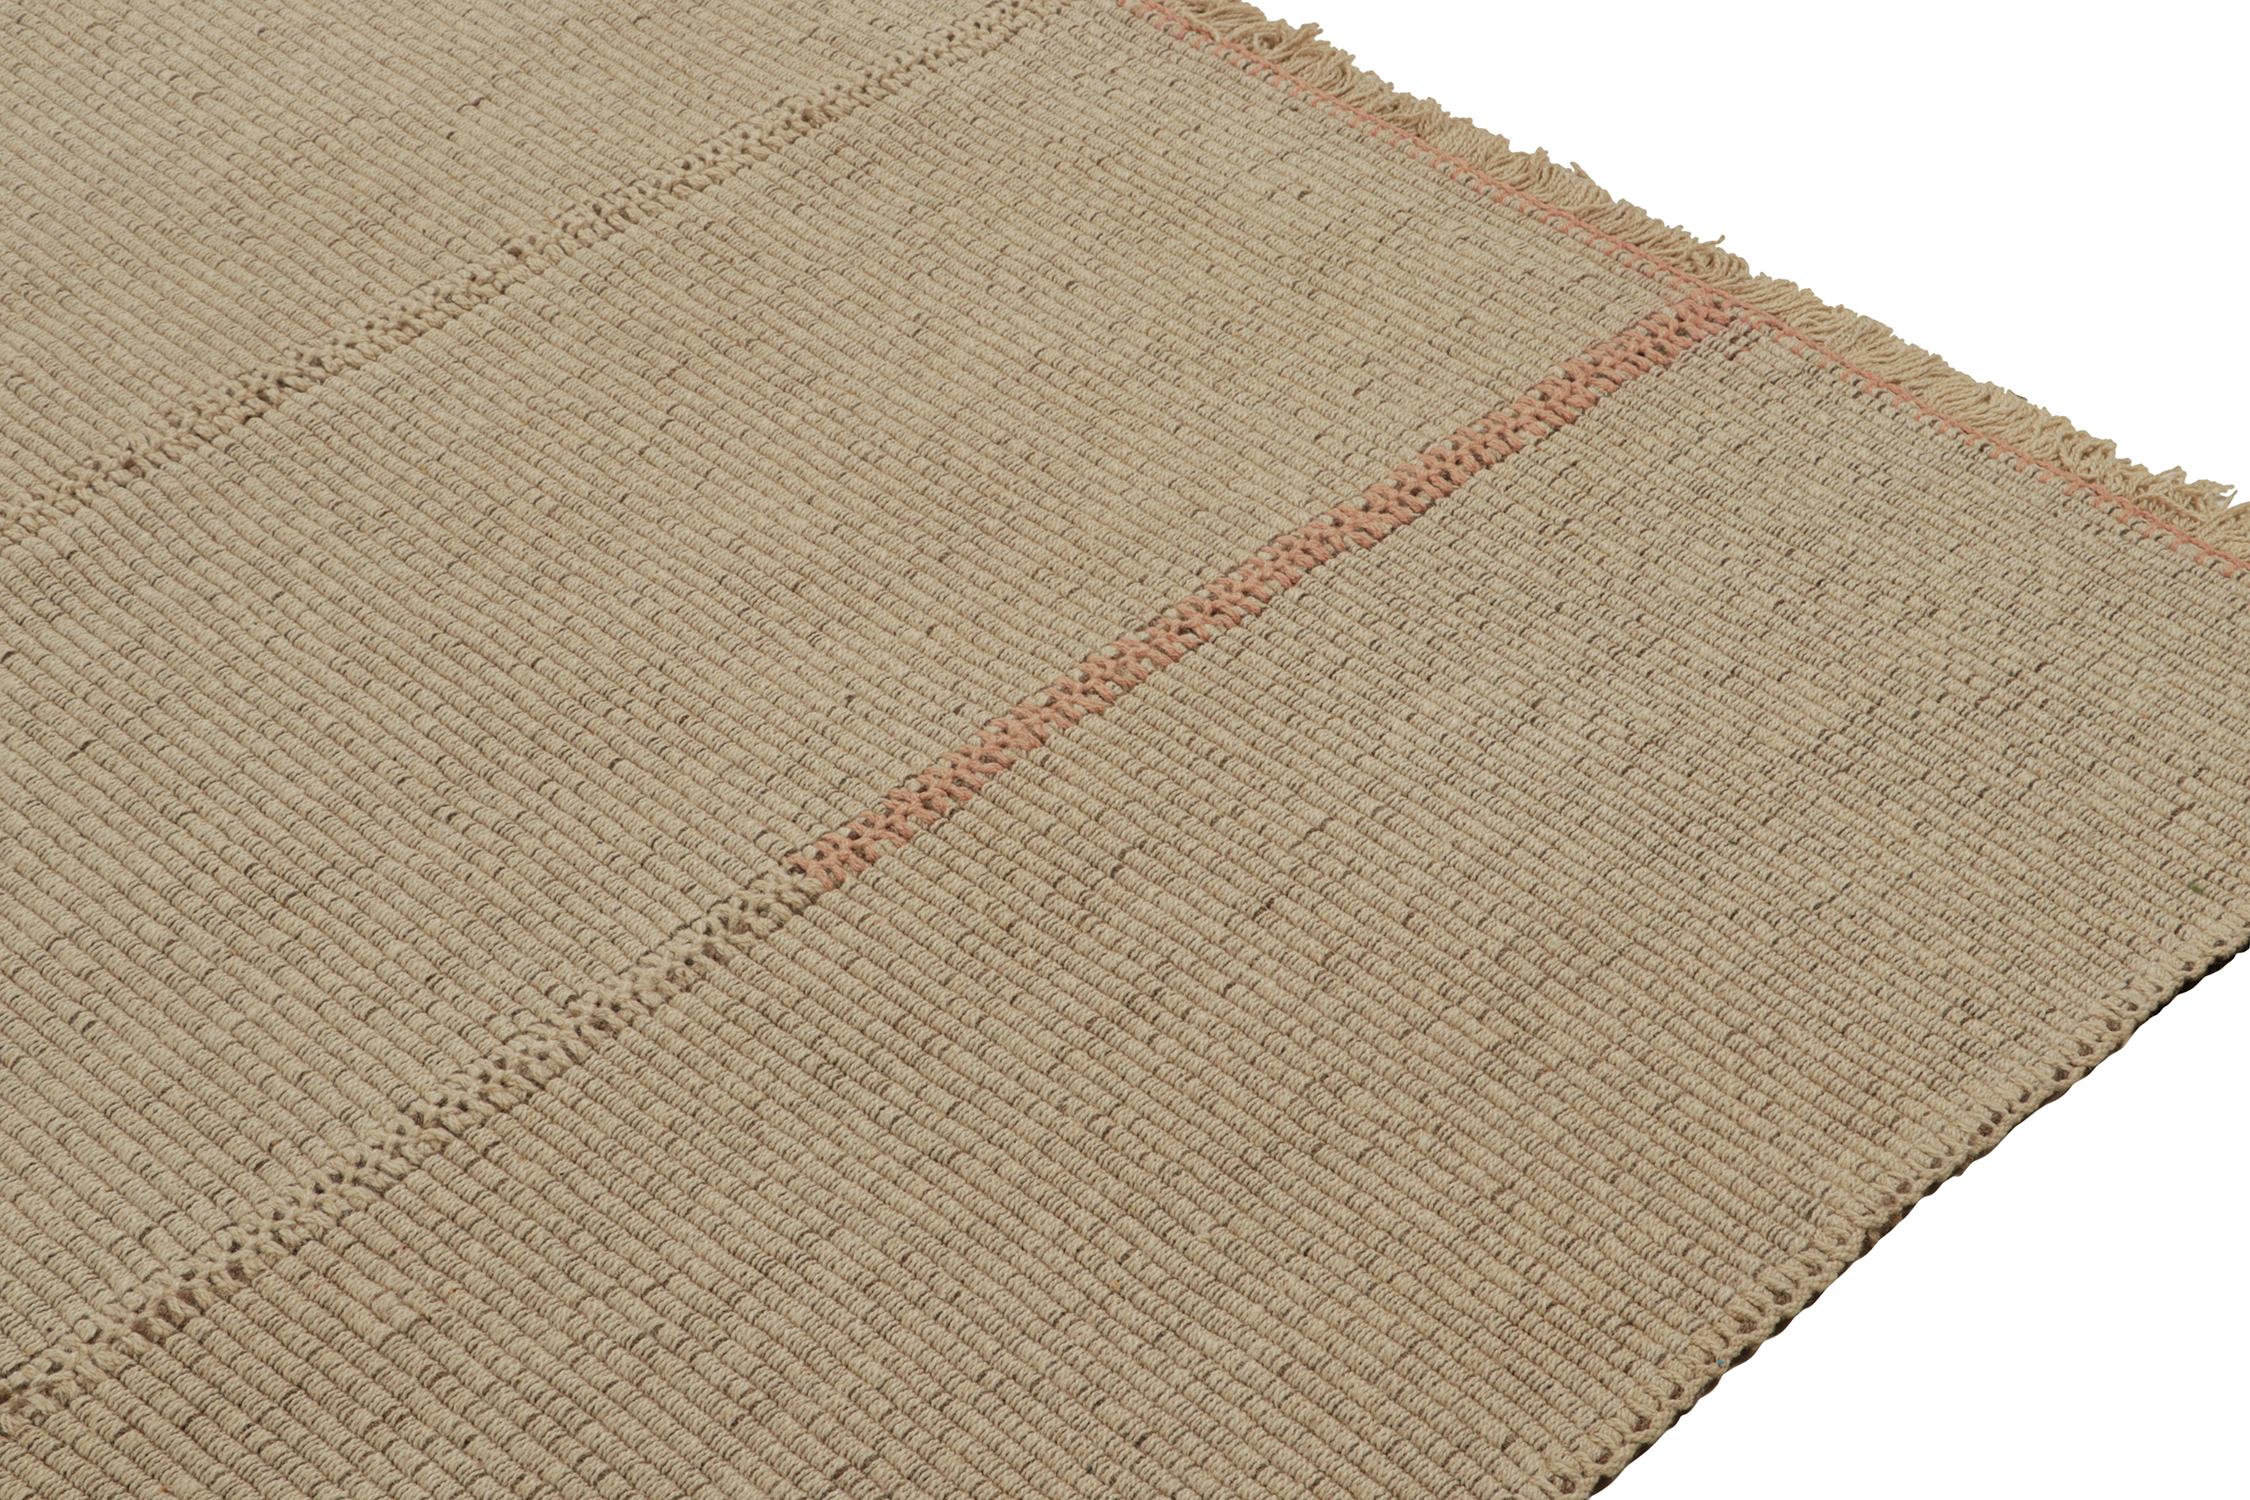 Hand-Knotted Rug & Kilim’s Contemporary Kilim in Sandy, Solid Beige-Brown with Pink Accents For Sale